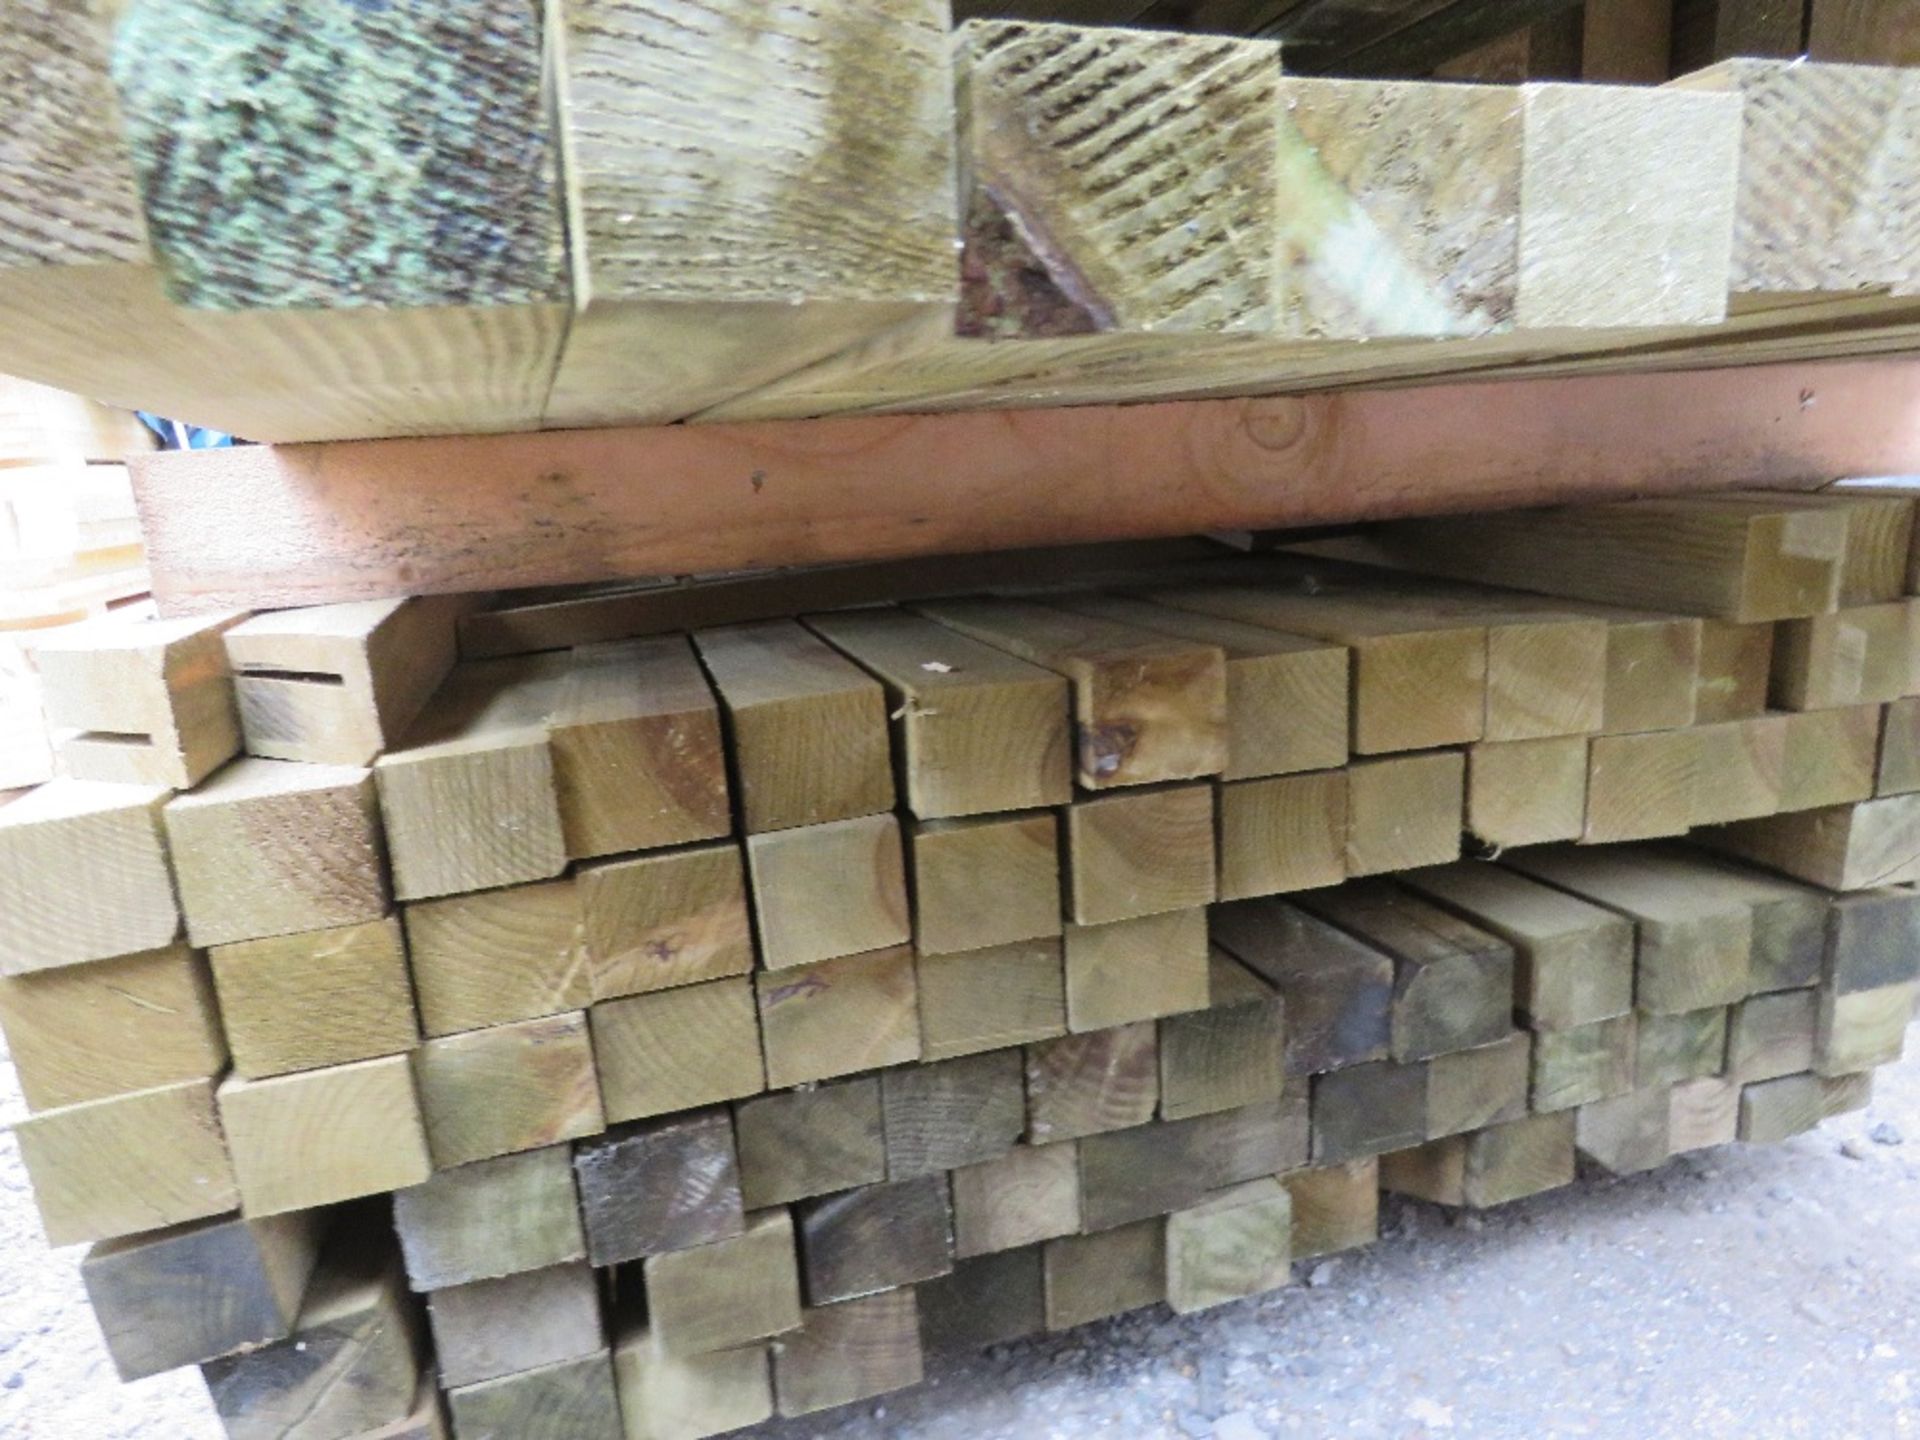 PACK OF TREATED TIMBER POSTS: 2.4M LENGTH 55MM X 50MM APPROX. 90NO IN TOTAL APPROX. - Image 2 of 3